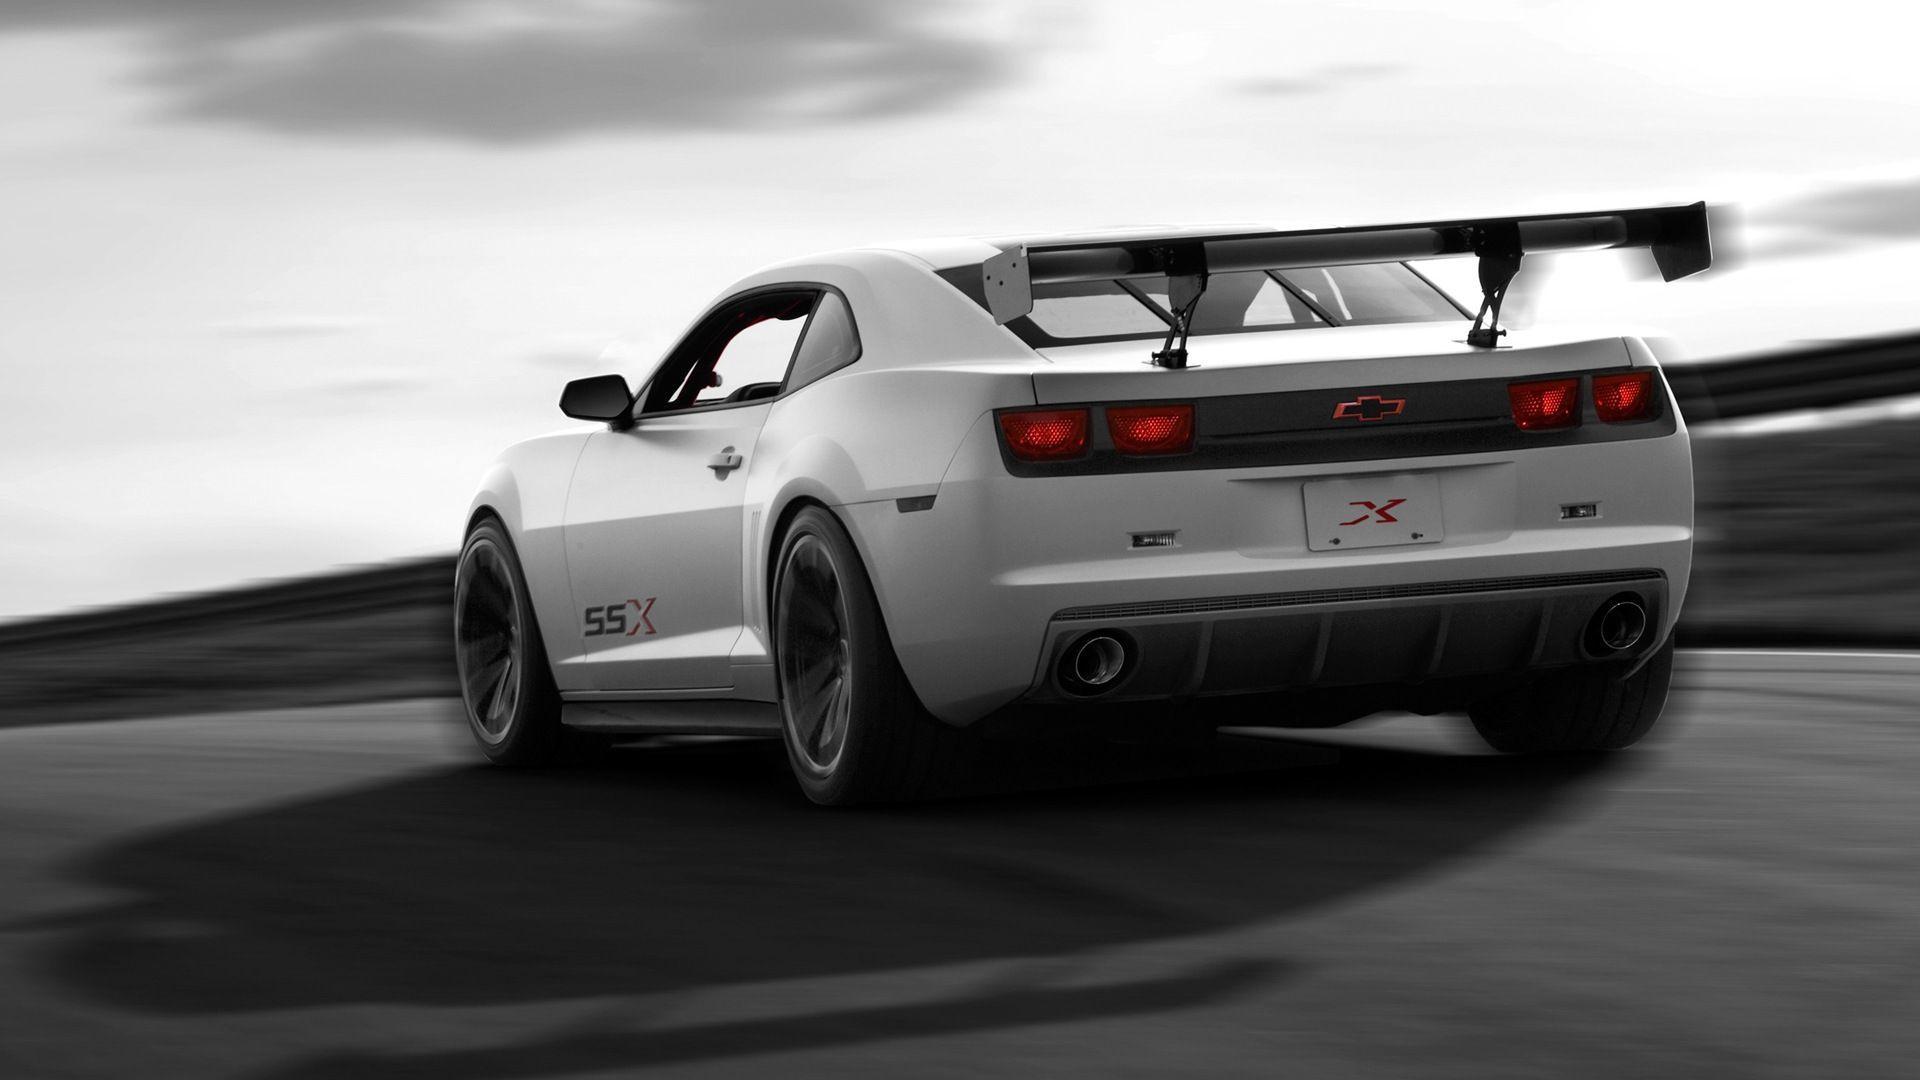 Camaro Ssx wallpapers 51364